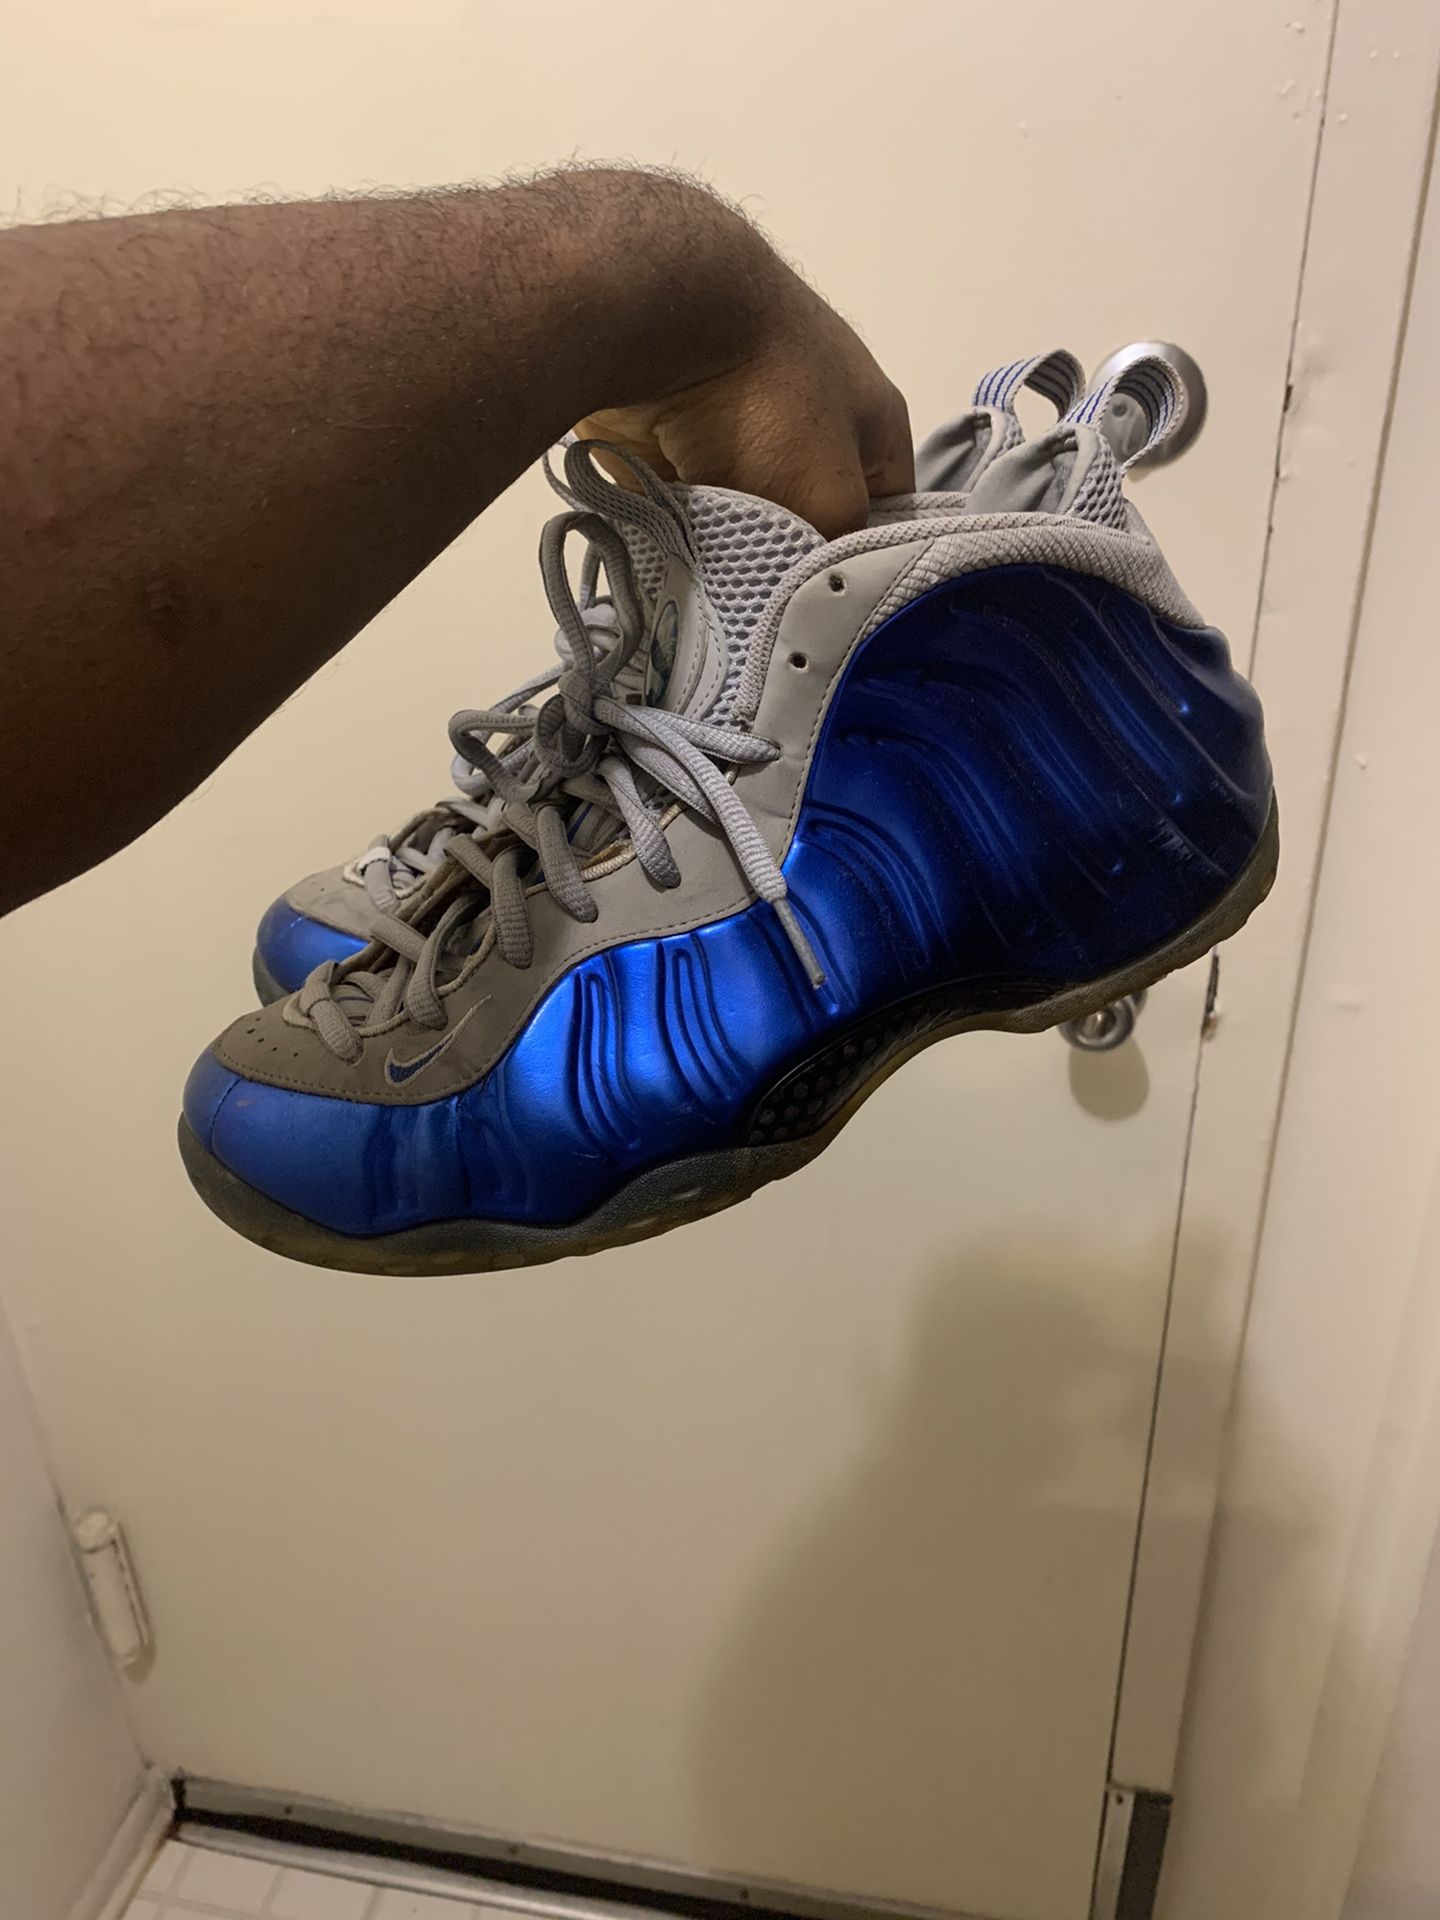 Nike Foamposites Sport Royals and Pine Greens